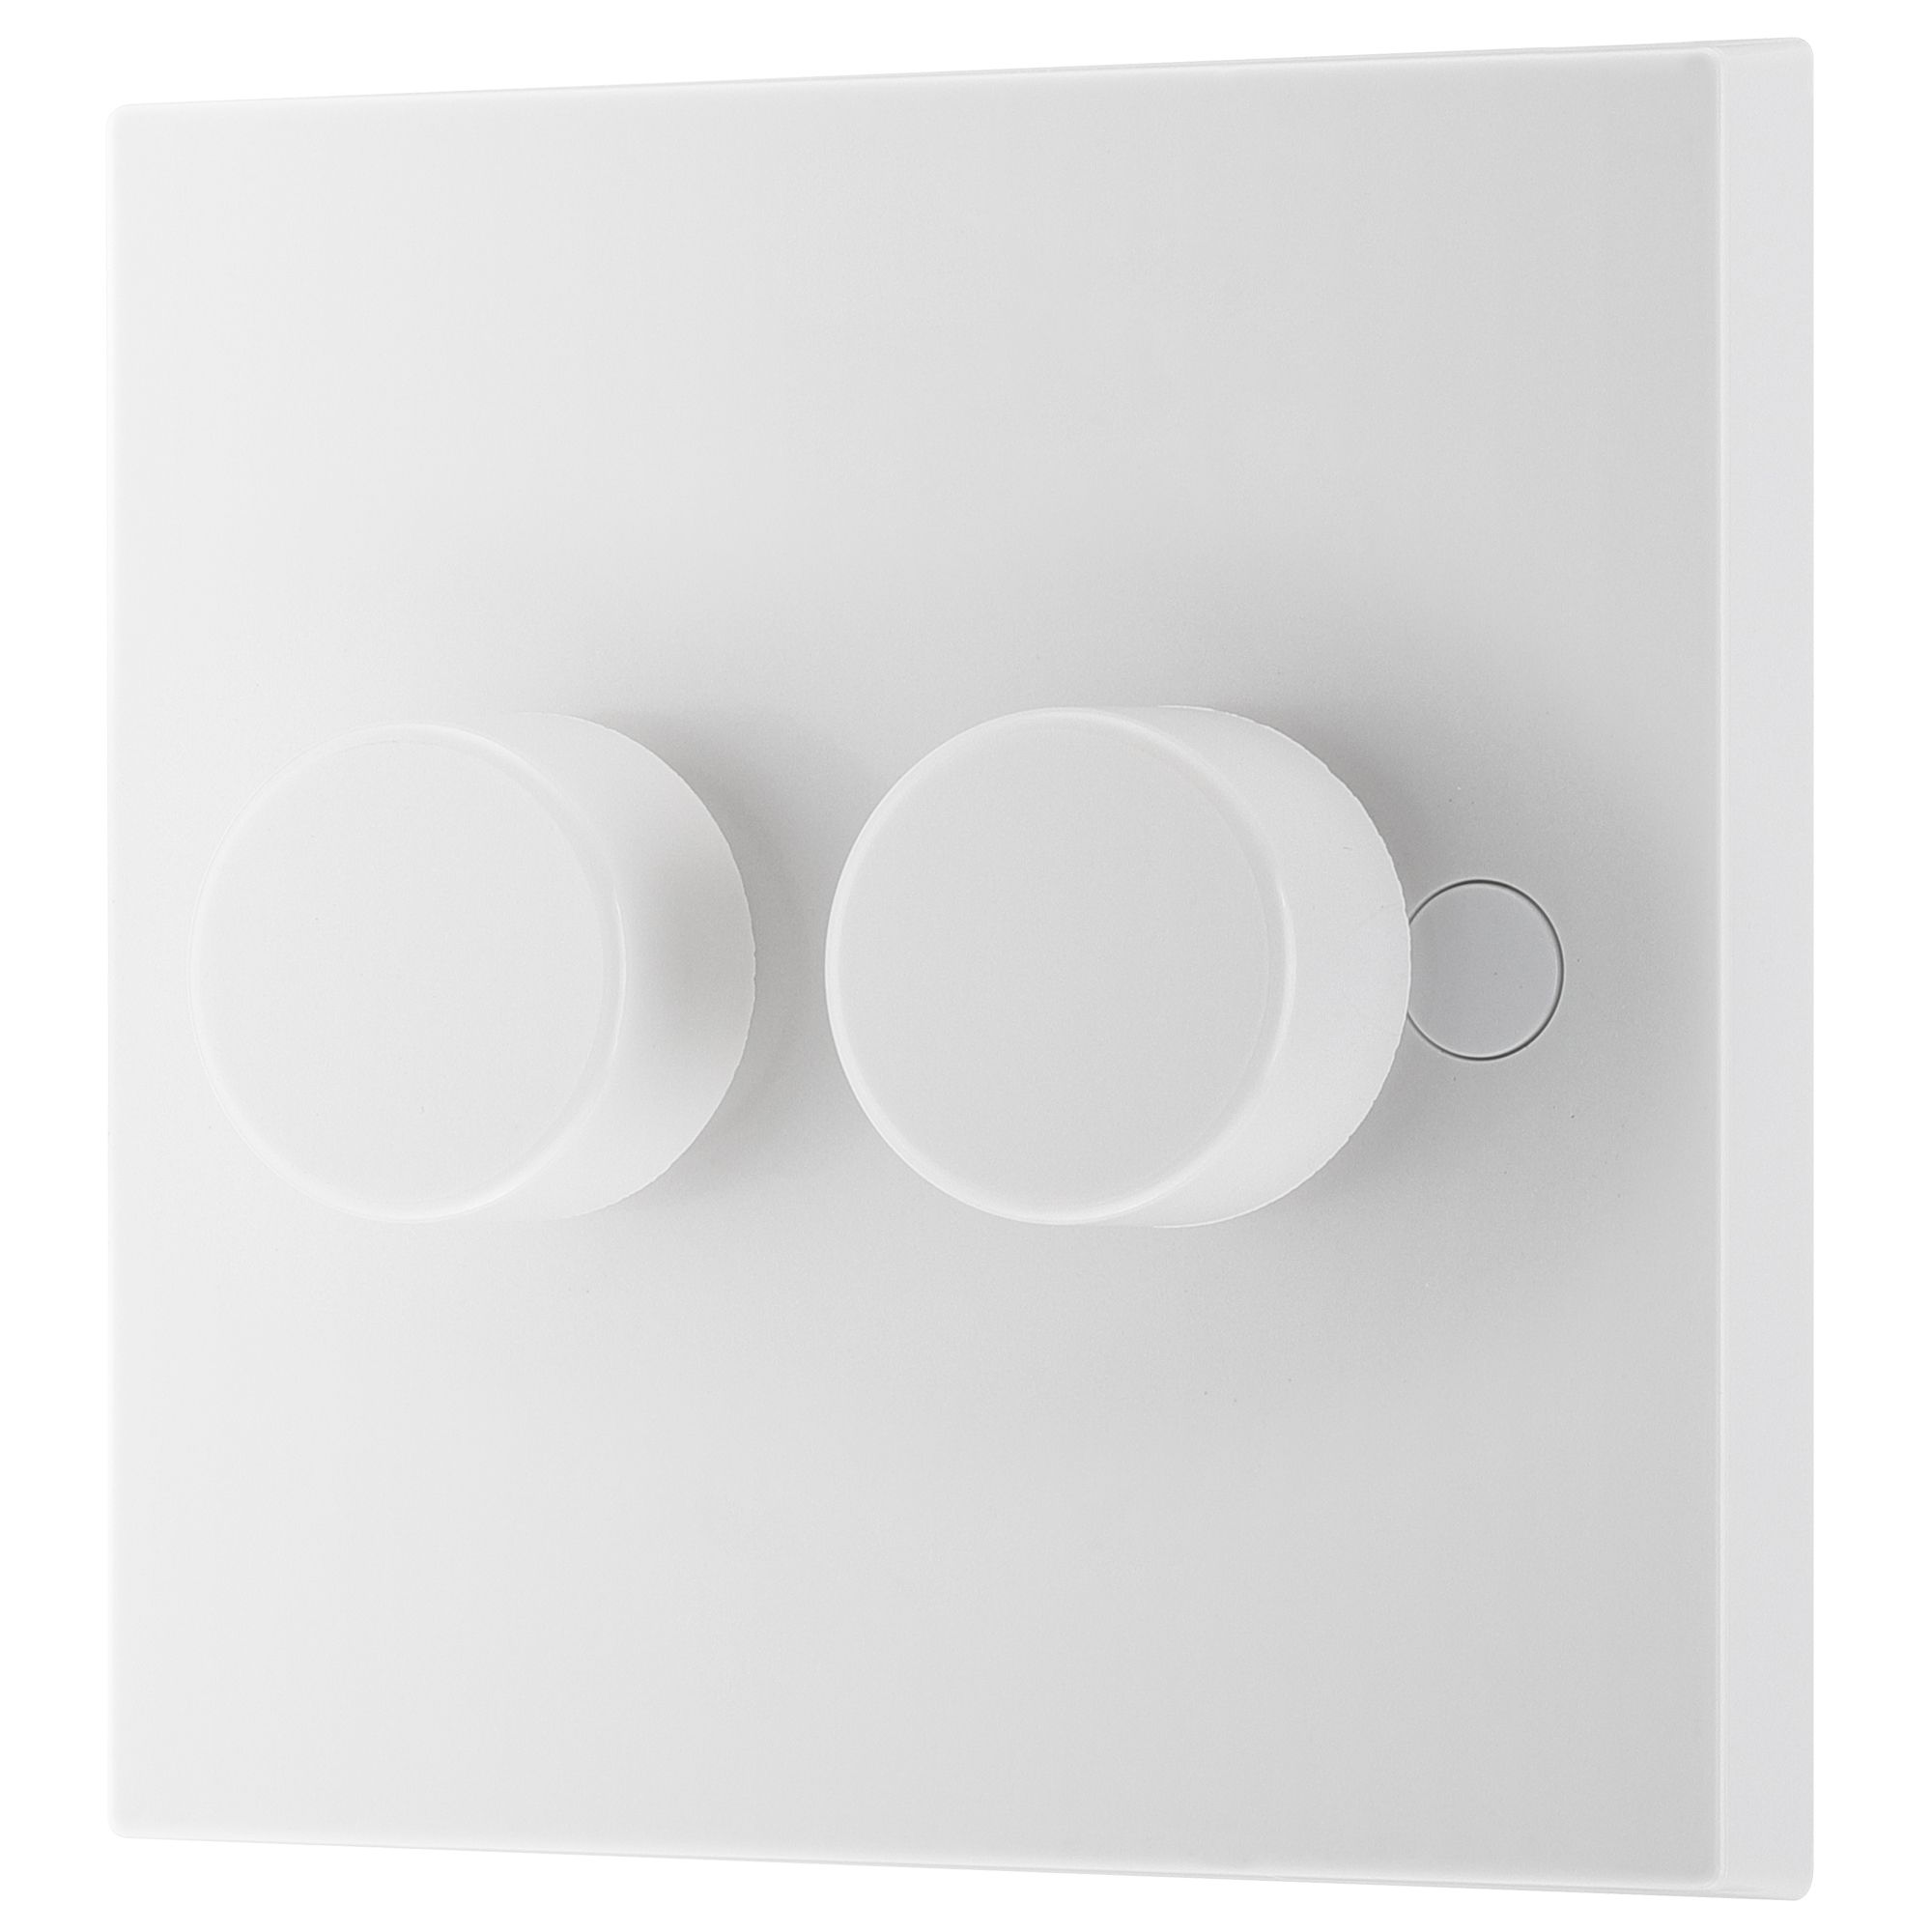 BG Raised square profile Double 2 way 200W Dimmer switch White 2 gang